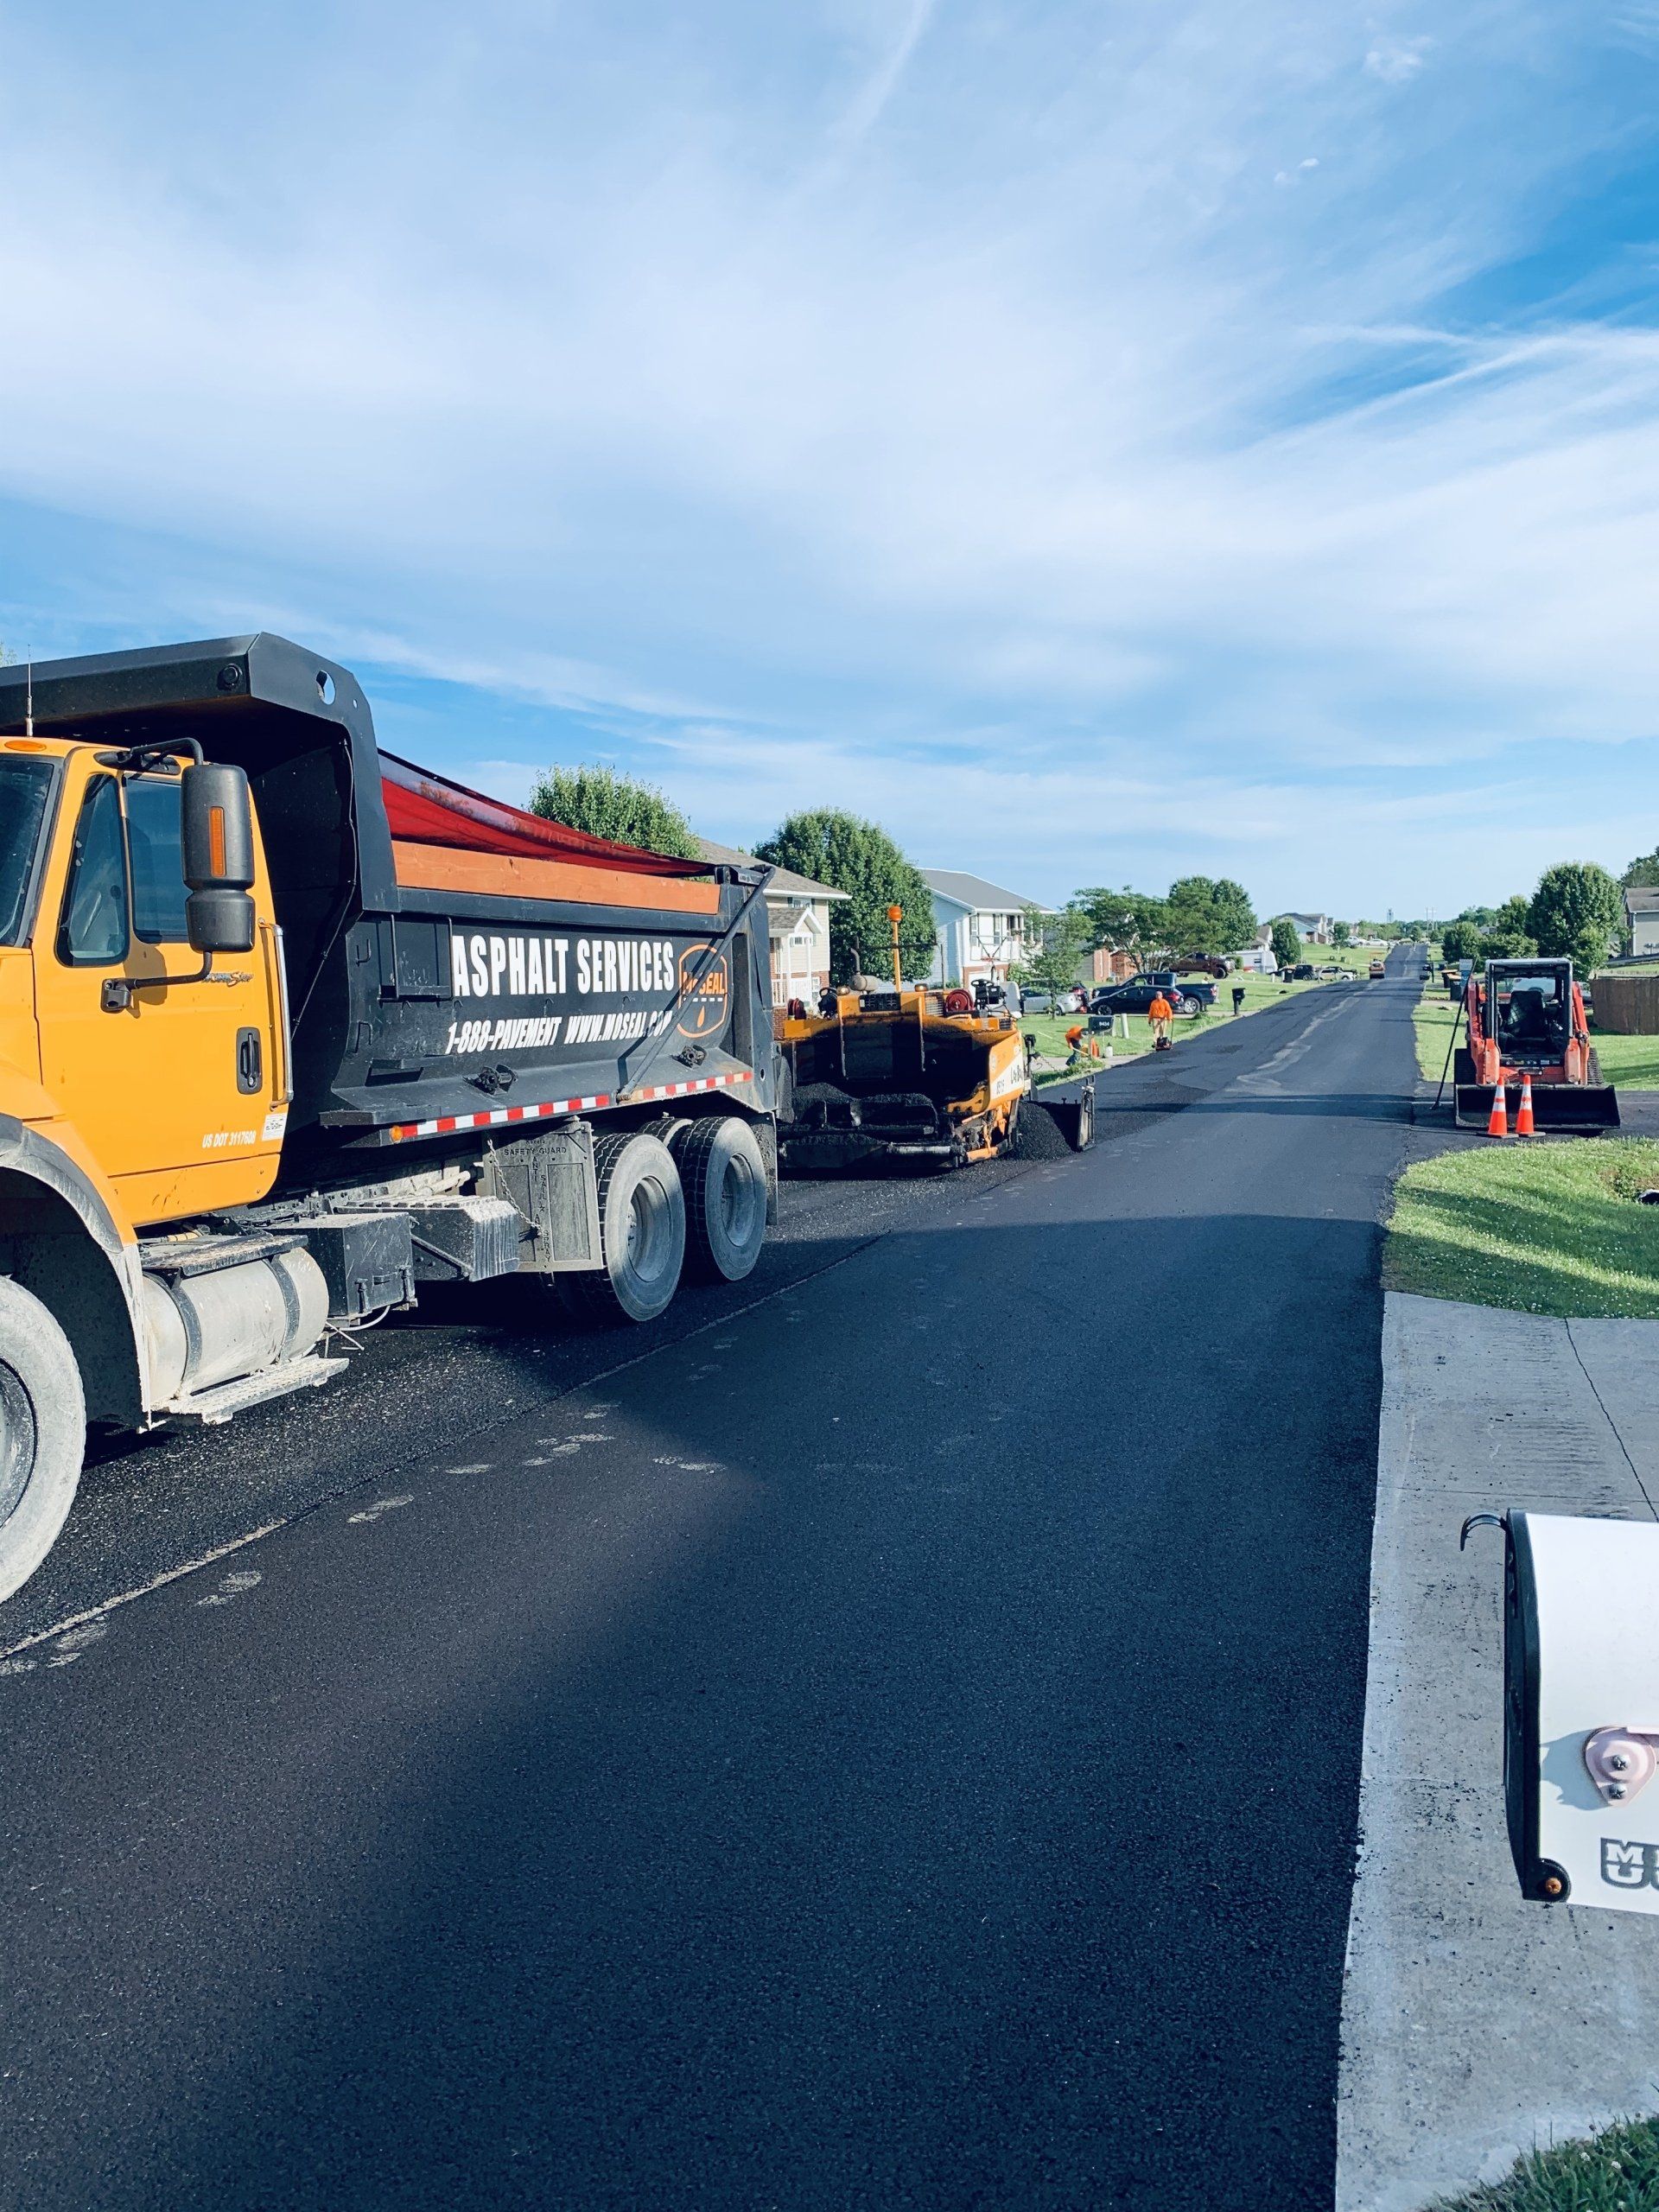 Fulton, Mo’s Premier Residnetial Asphalt Paver Is MoSEAL. Call for a Free Asphalt Paving Quote.